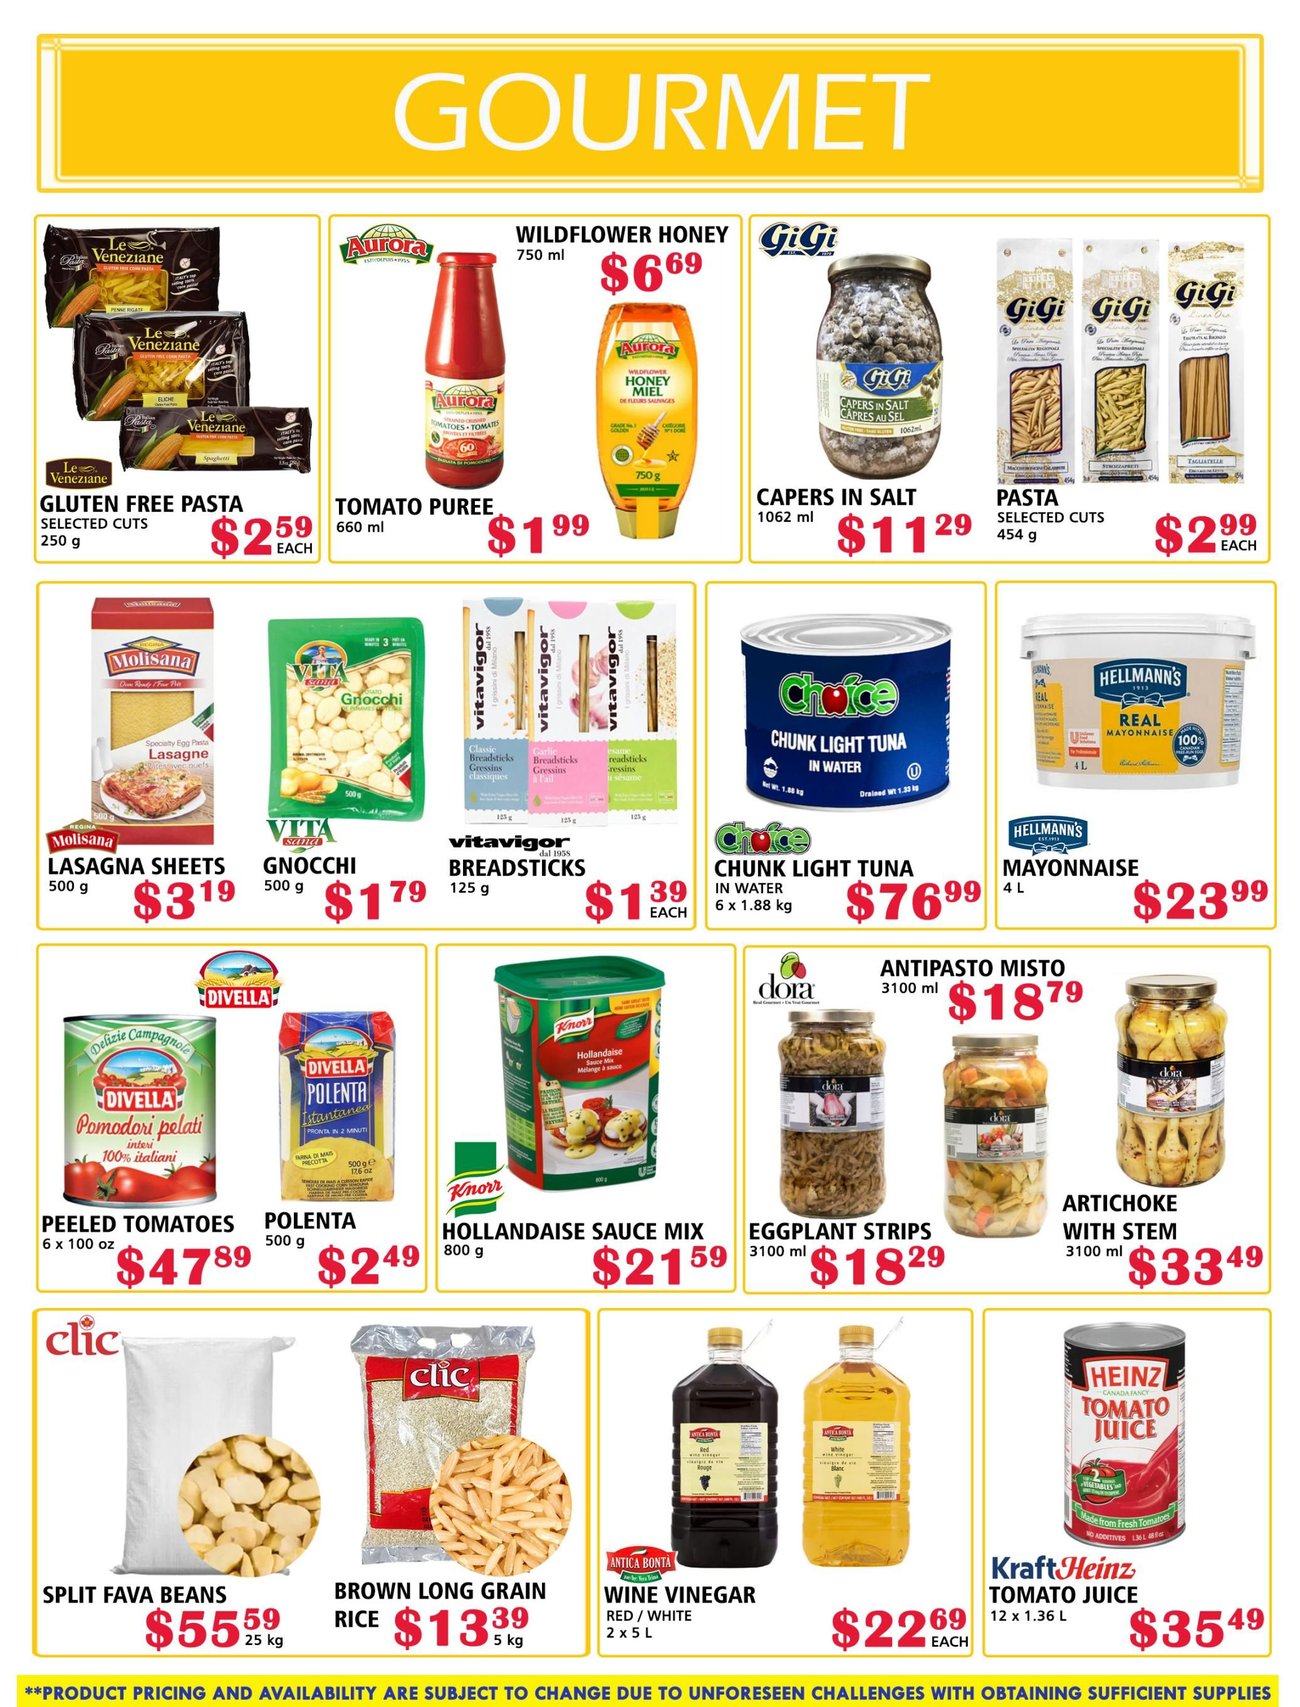 MVR Cash and Carry - Monthly Specials - Page 4